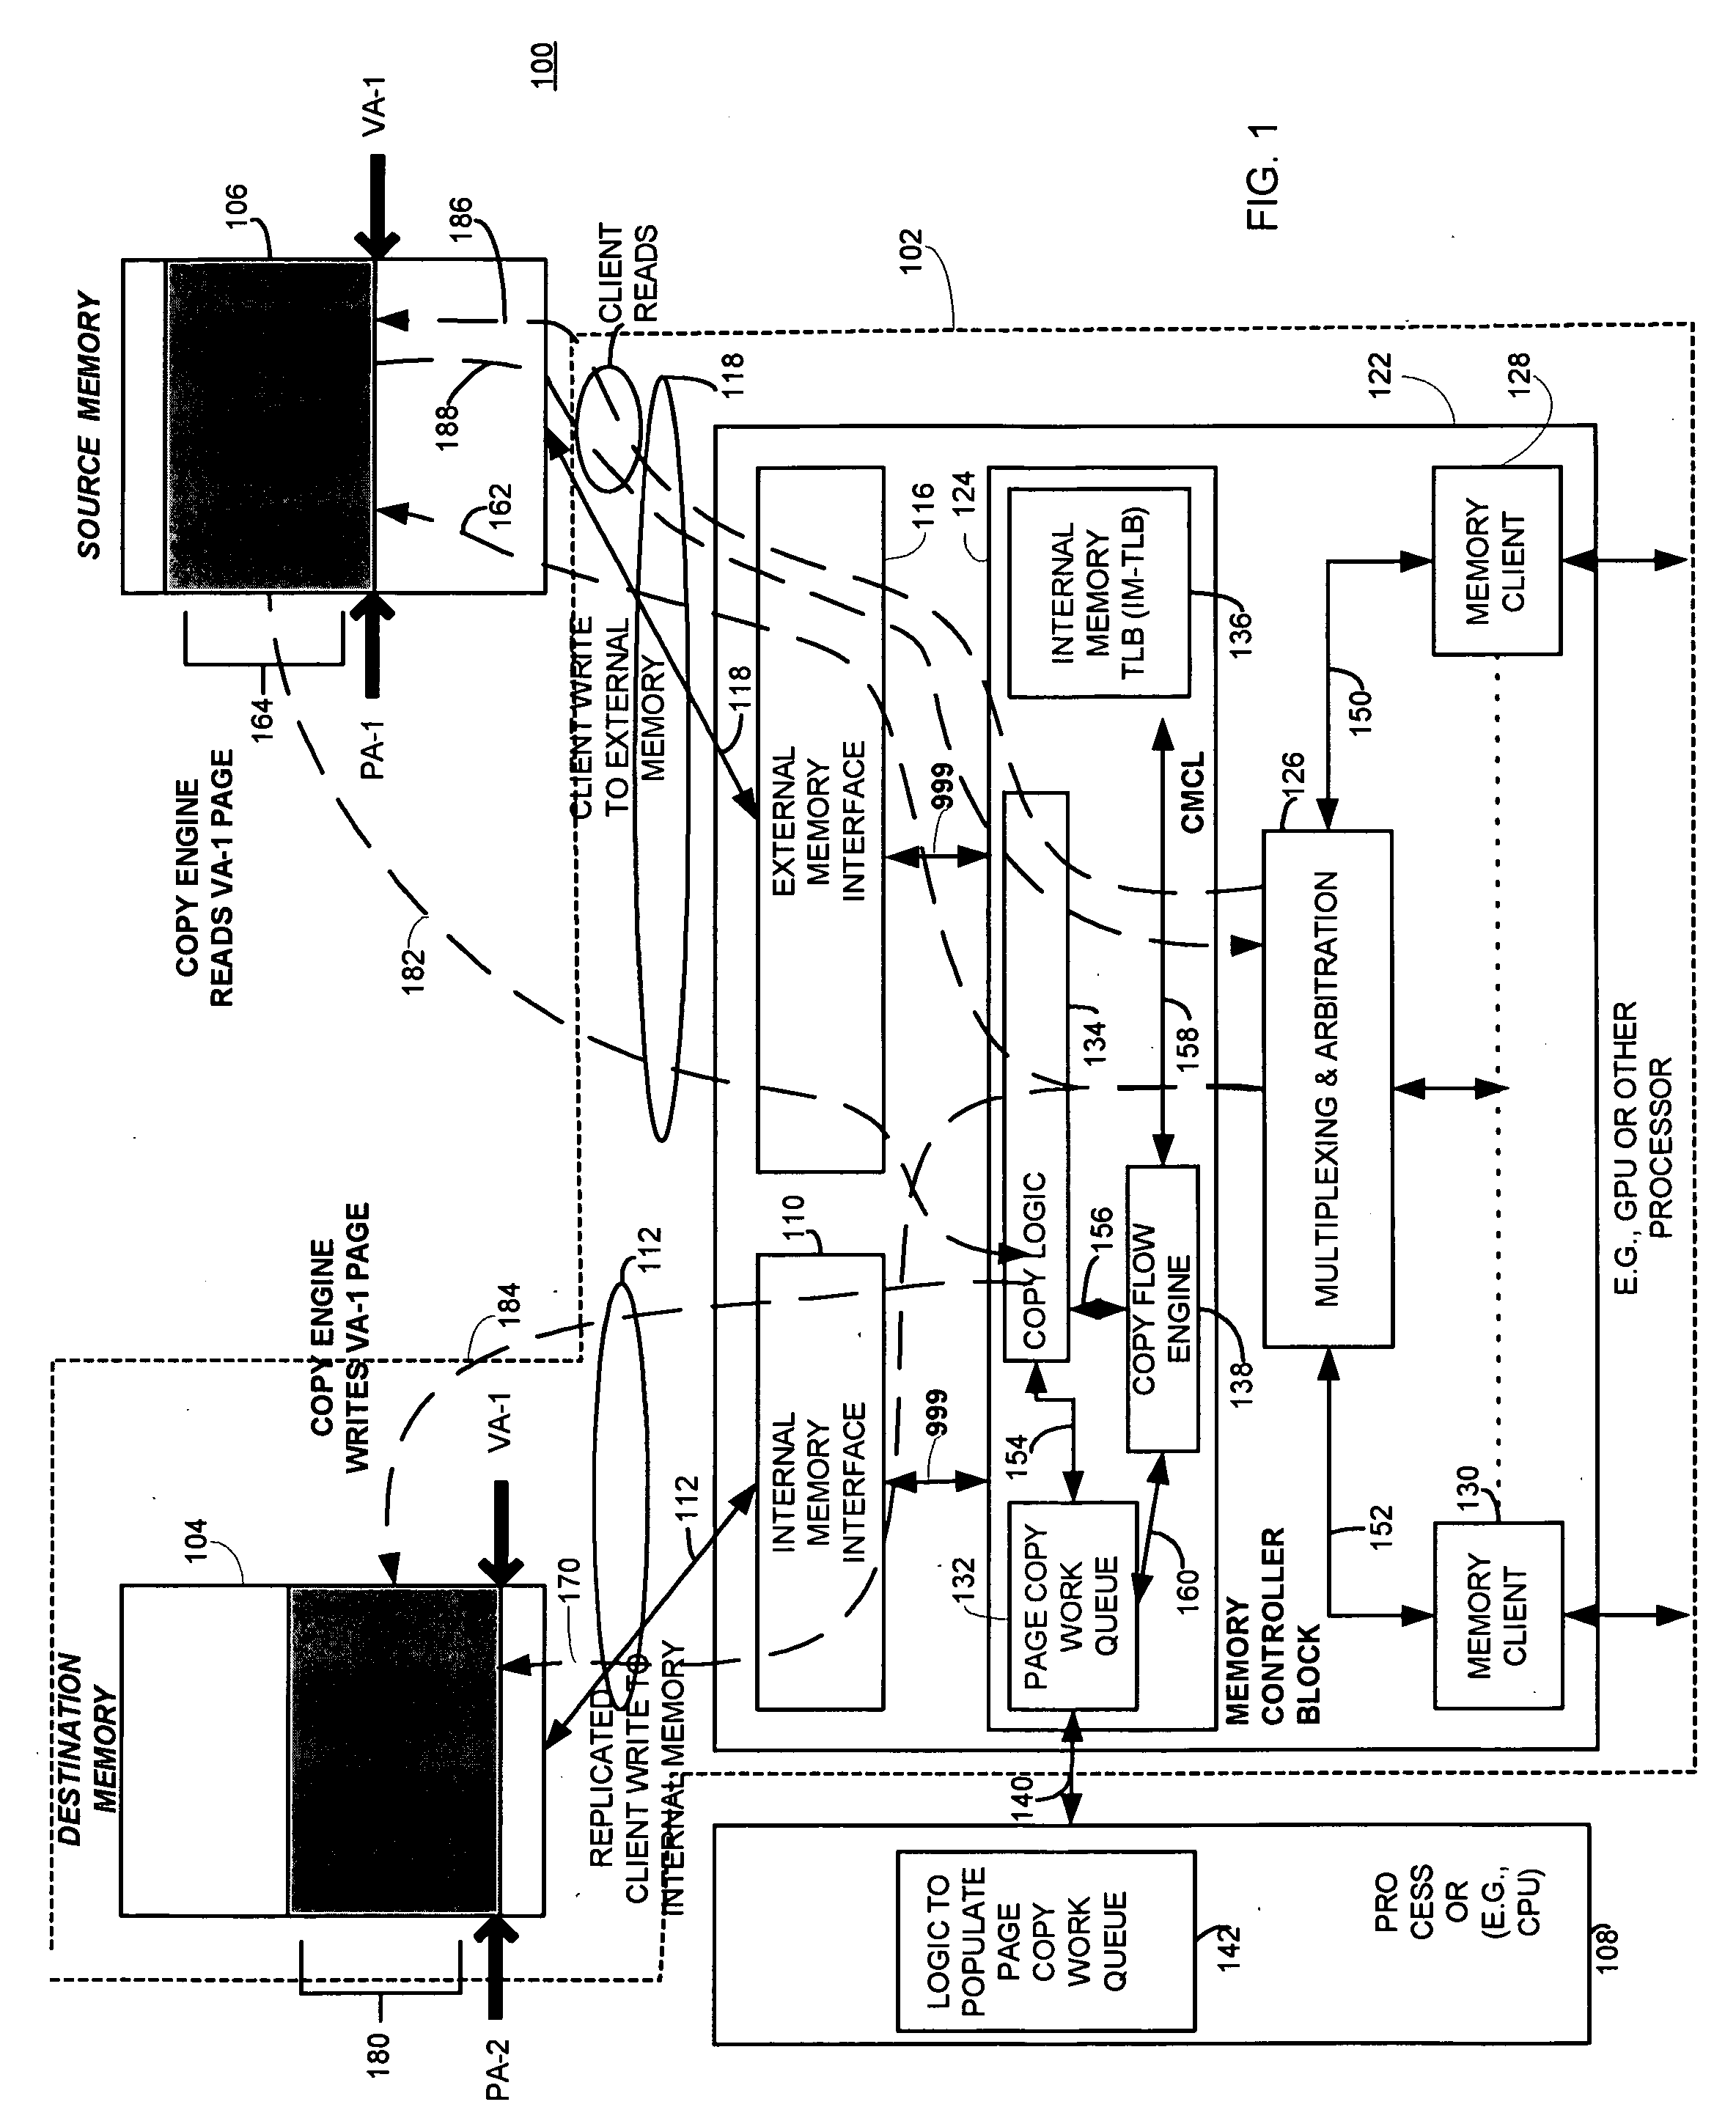 Method and apparatus for reallocating memory content